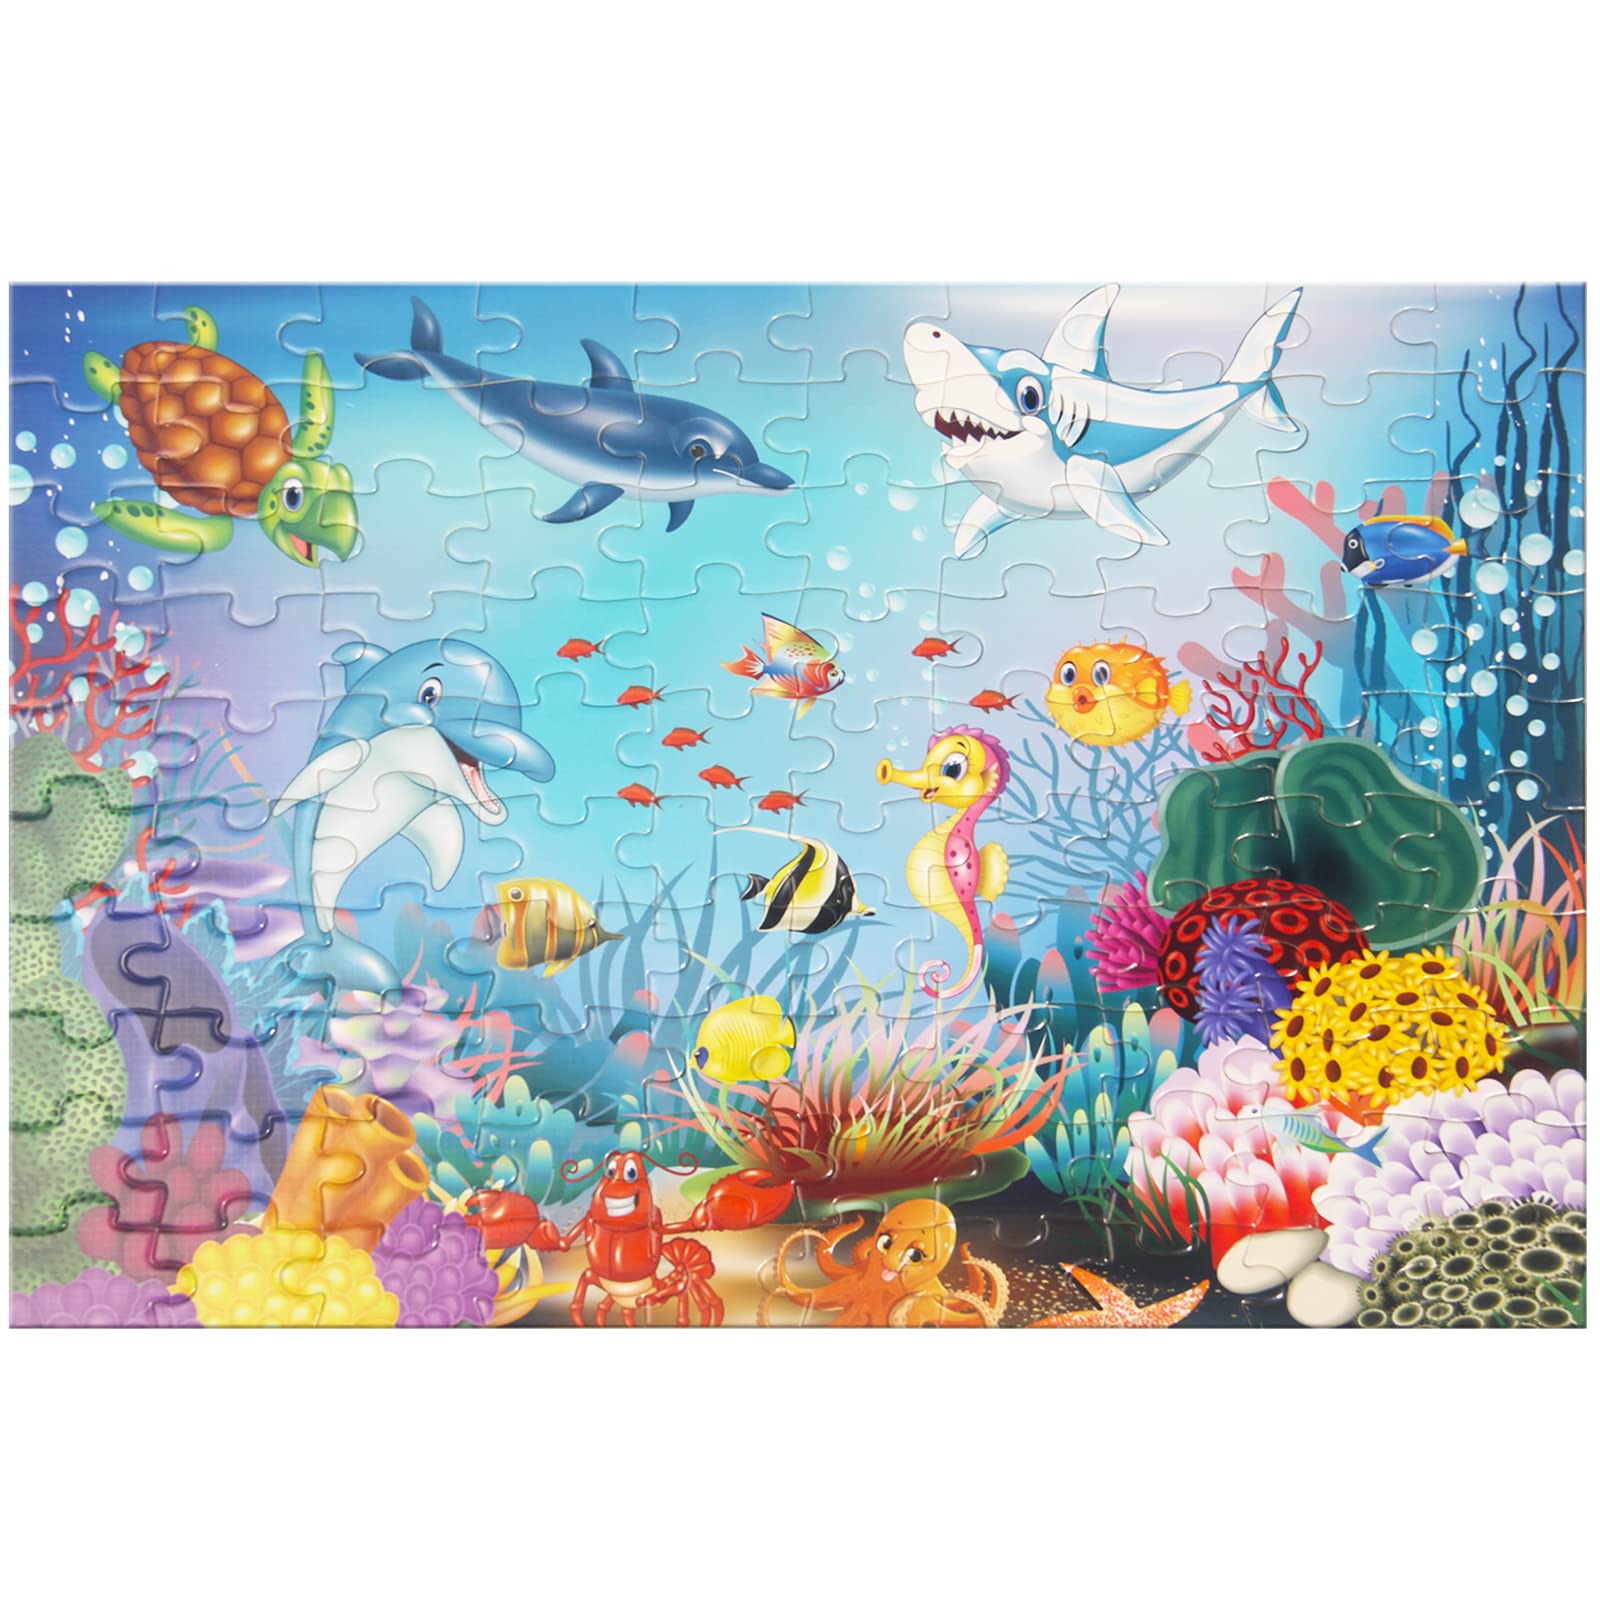 100 Piece Puzzles for Kids, Underwater World Jigsaw Puzzles